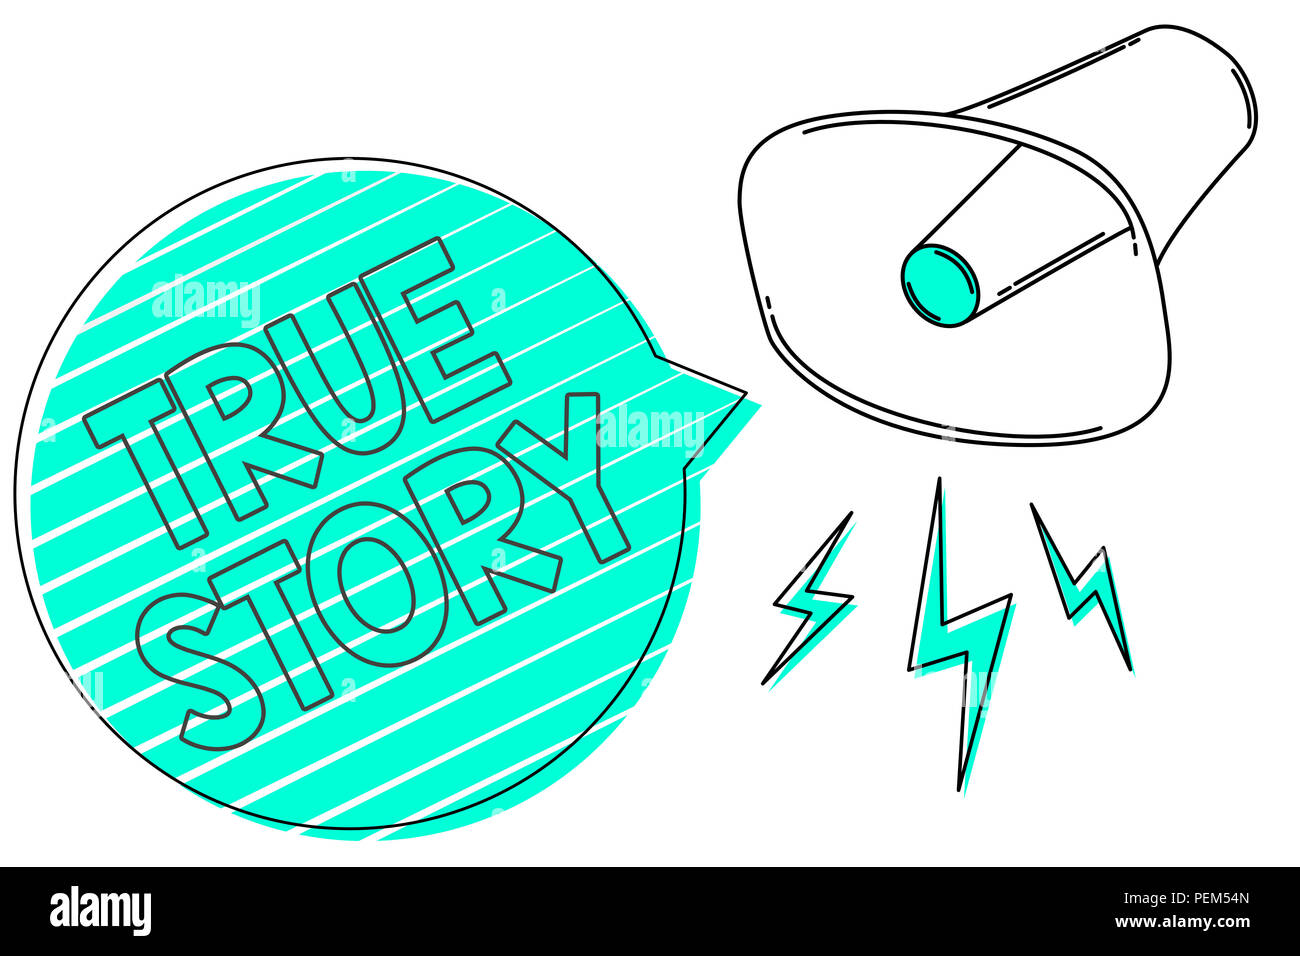 Handwriting Text True Story Concept Meaning The Day To Day Experiences Of An Individual In His Entire Life Megaphone Loudspeaker Green Speech Bubble Stock Photo Alamy